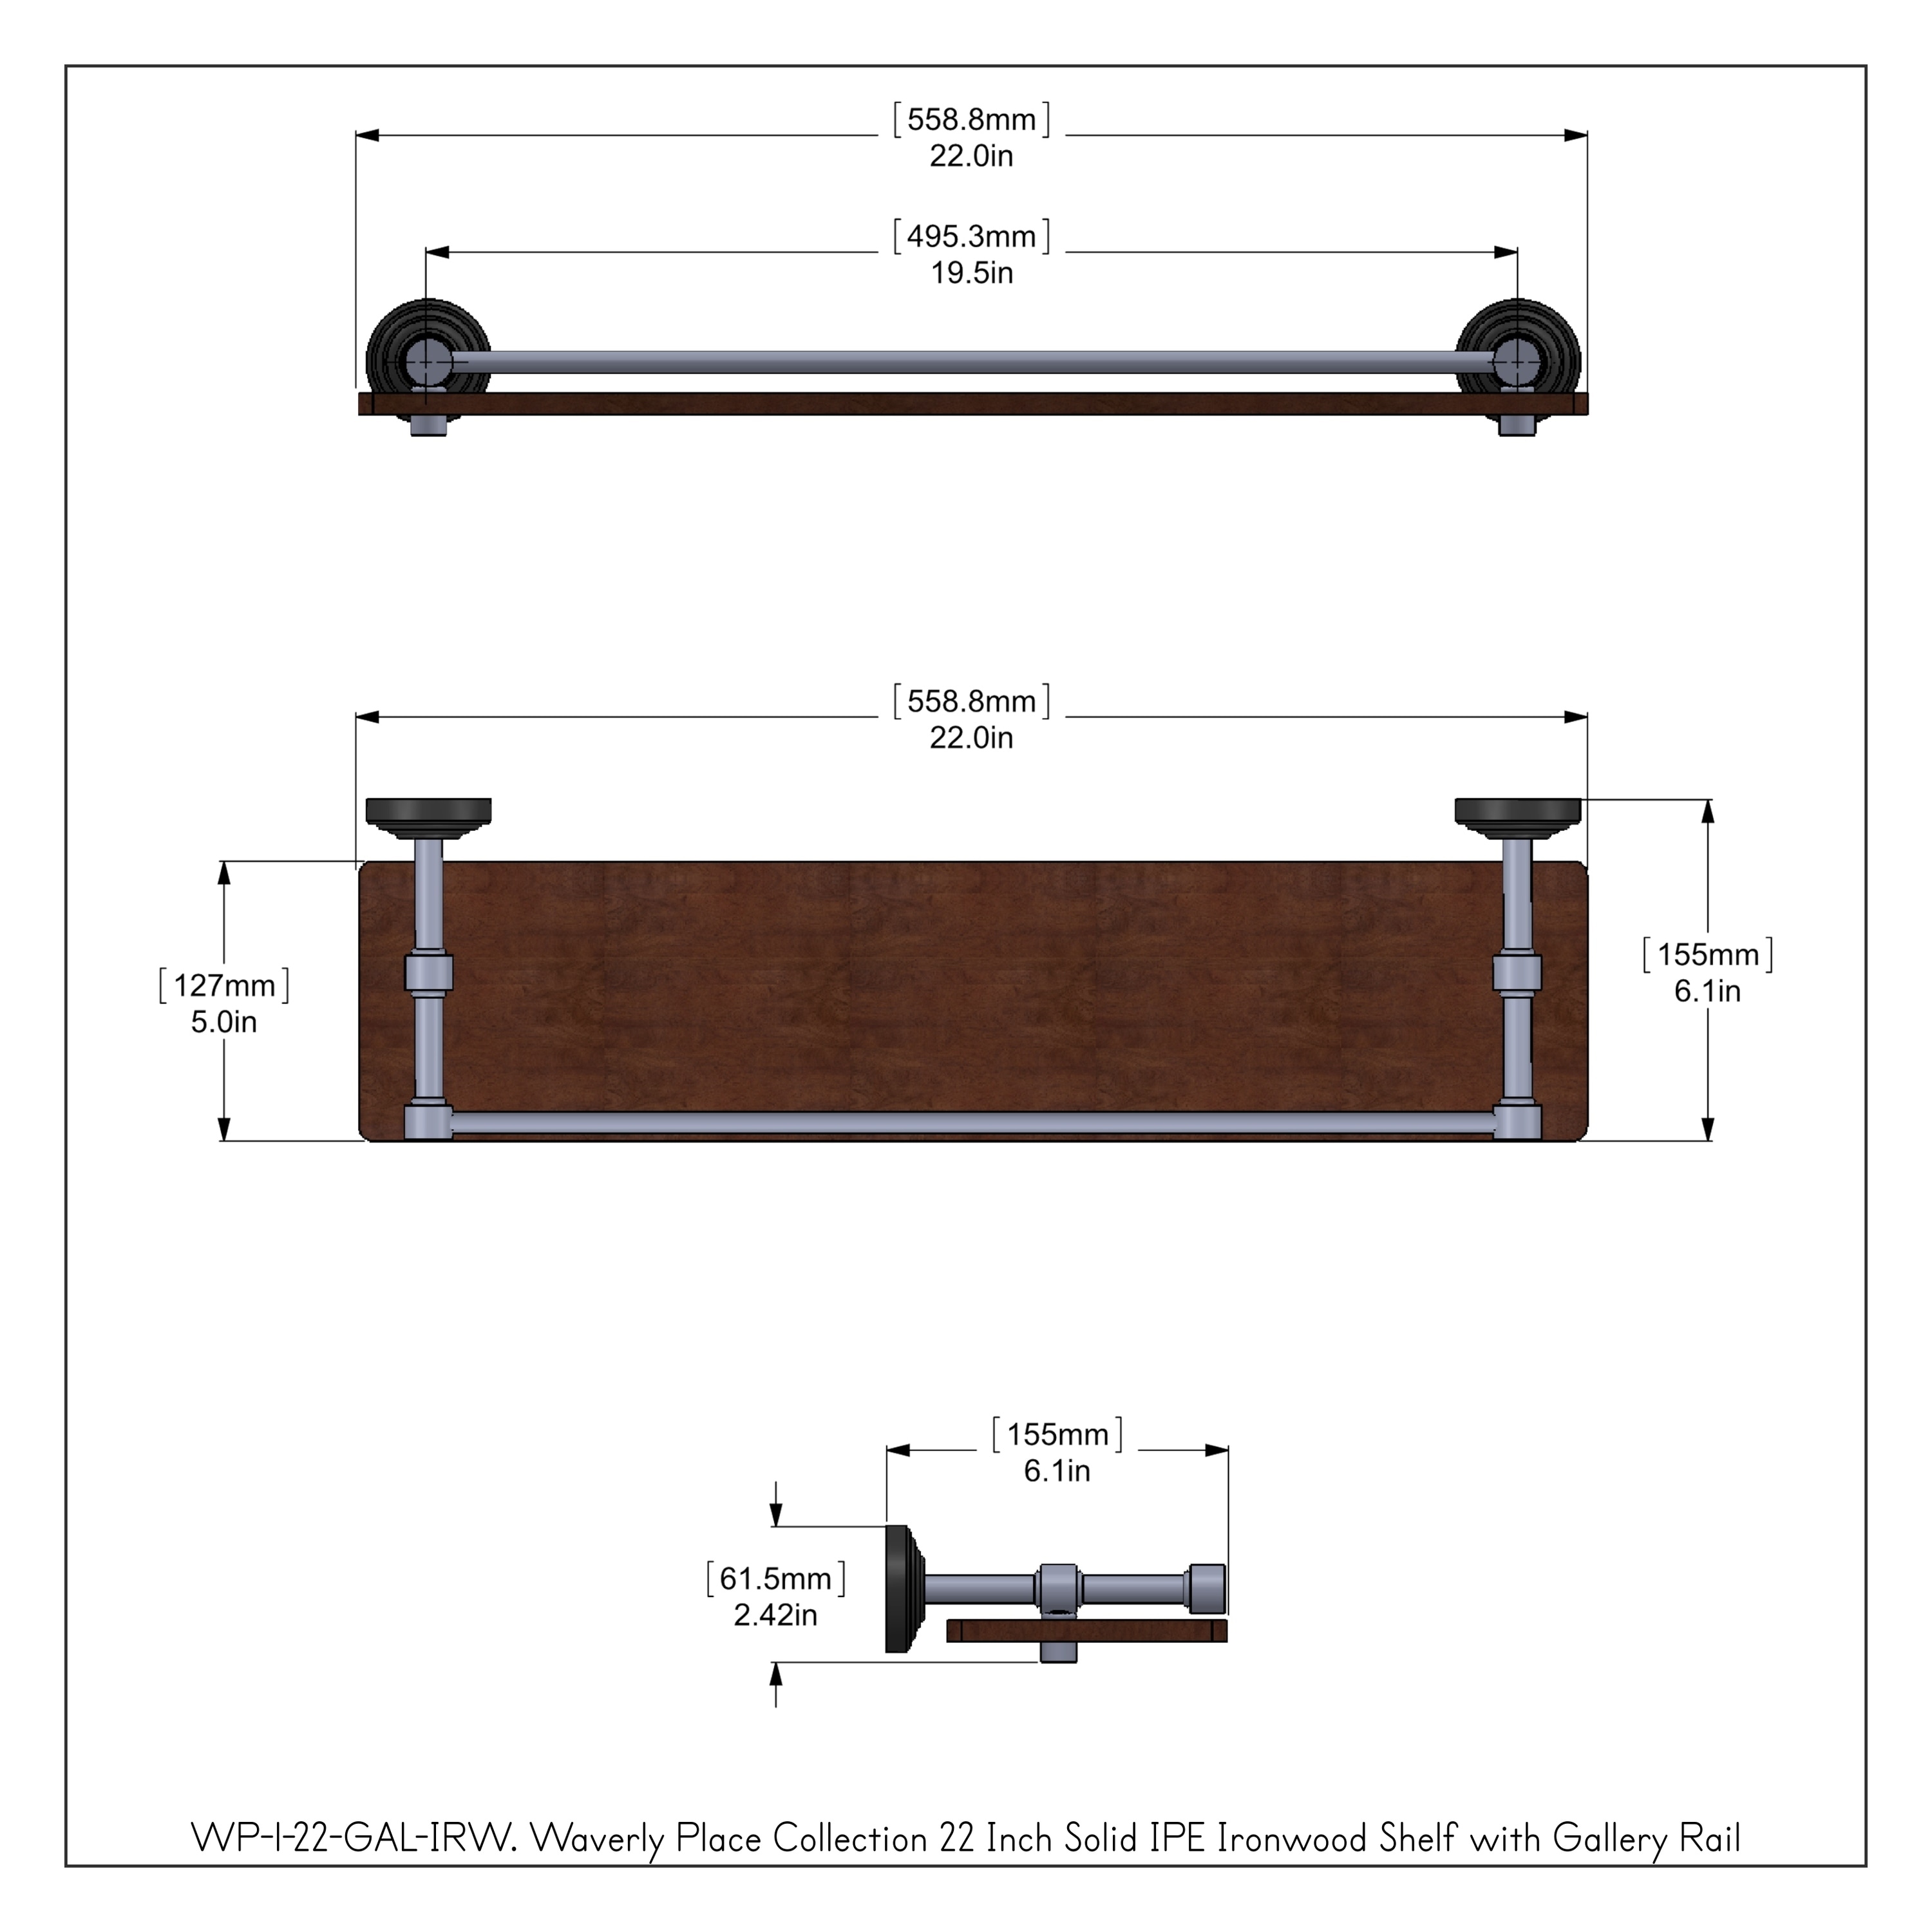 Allied Brass 22 Inch Solid IPE Ironwood Shelf with Gallery Rail On Sale  Bed Bath  Beyond 12004464